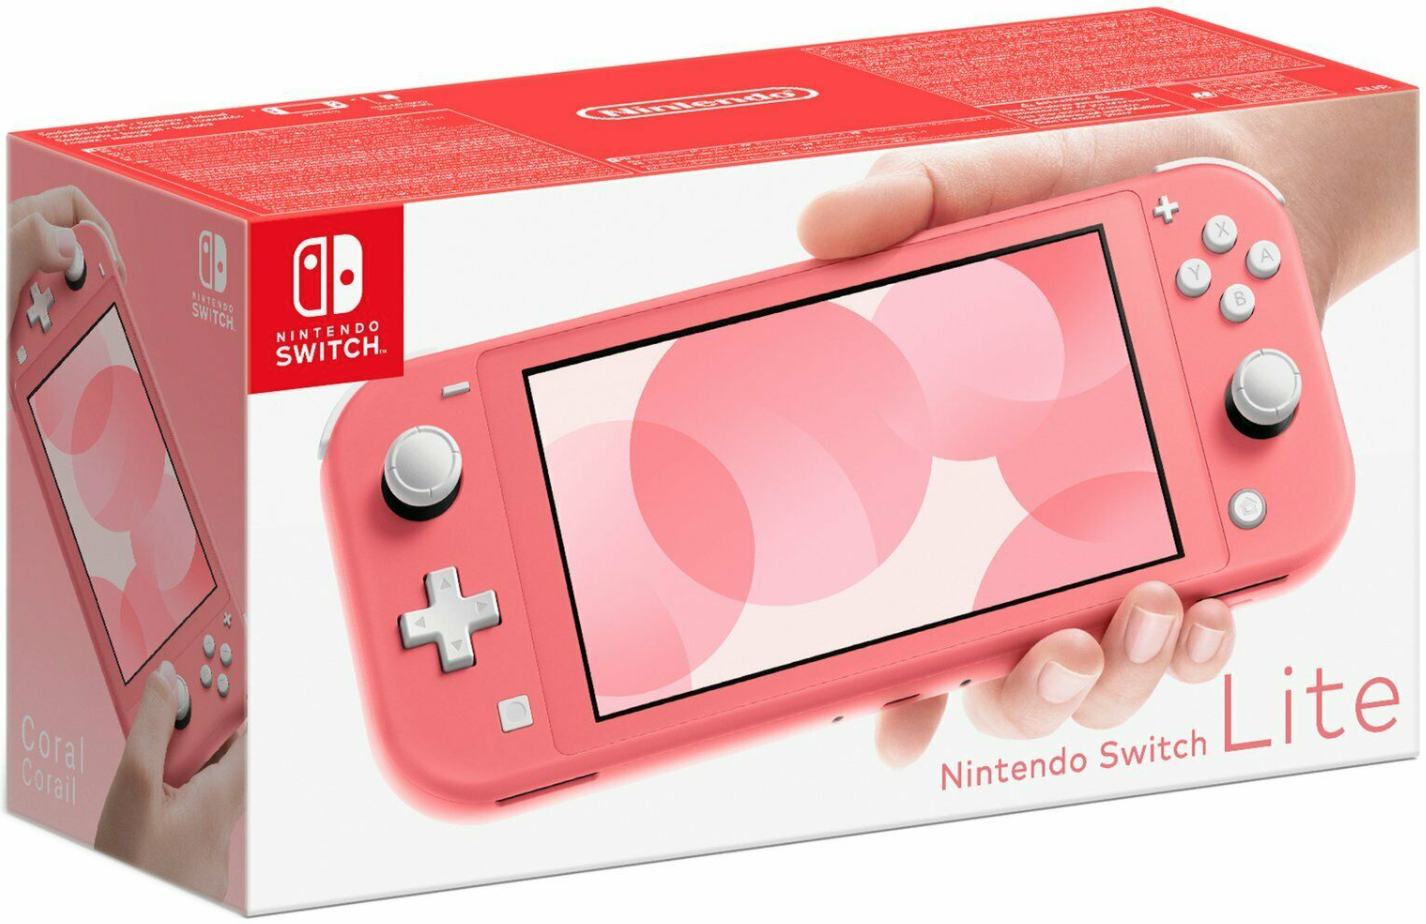 Nintendo Switch Lite 5.5 Inch Touchscreen Handheld Console (Coral) A